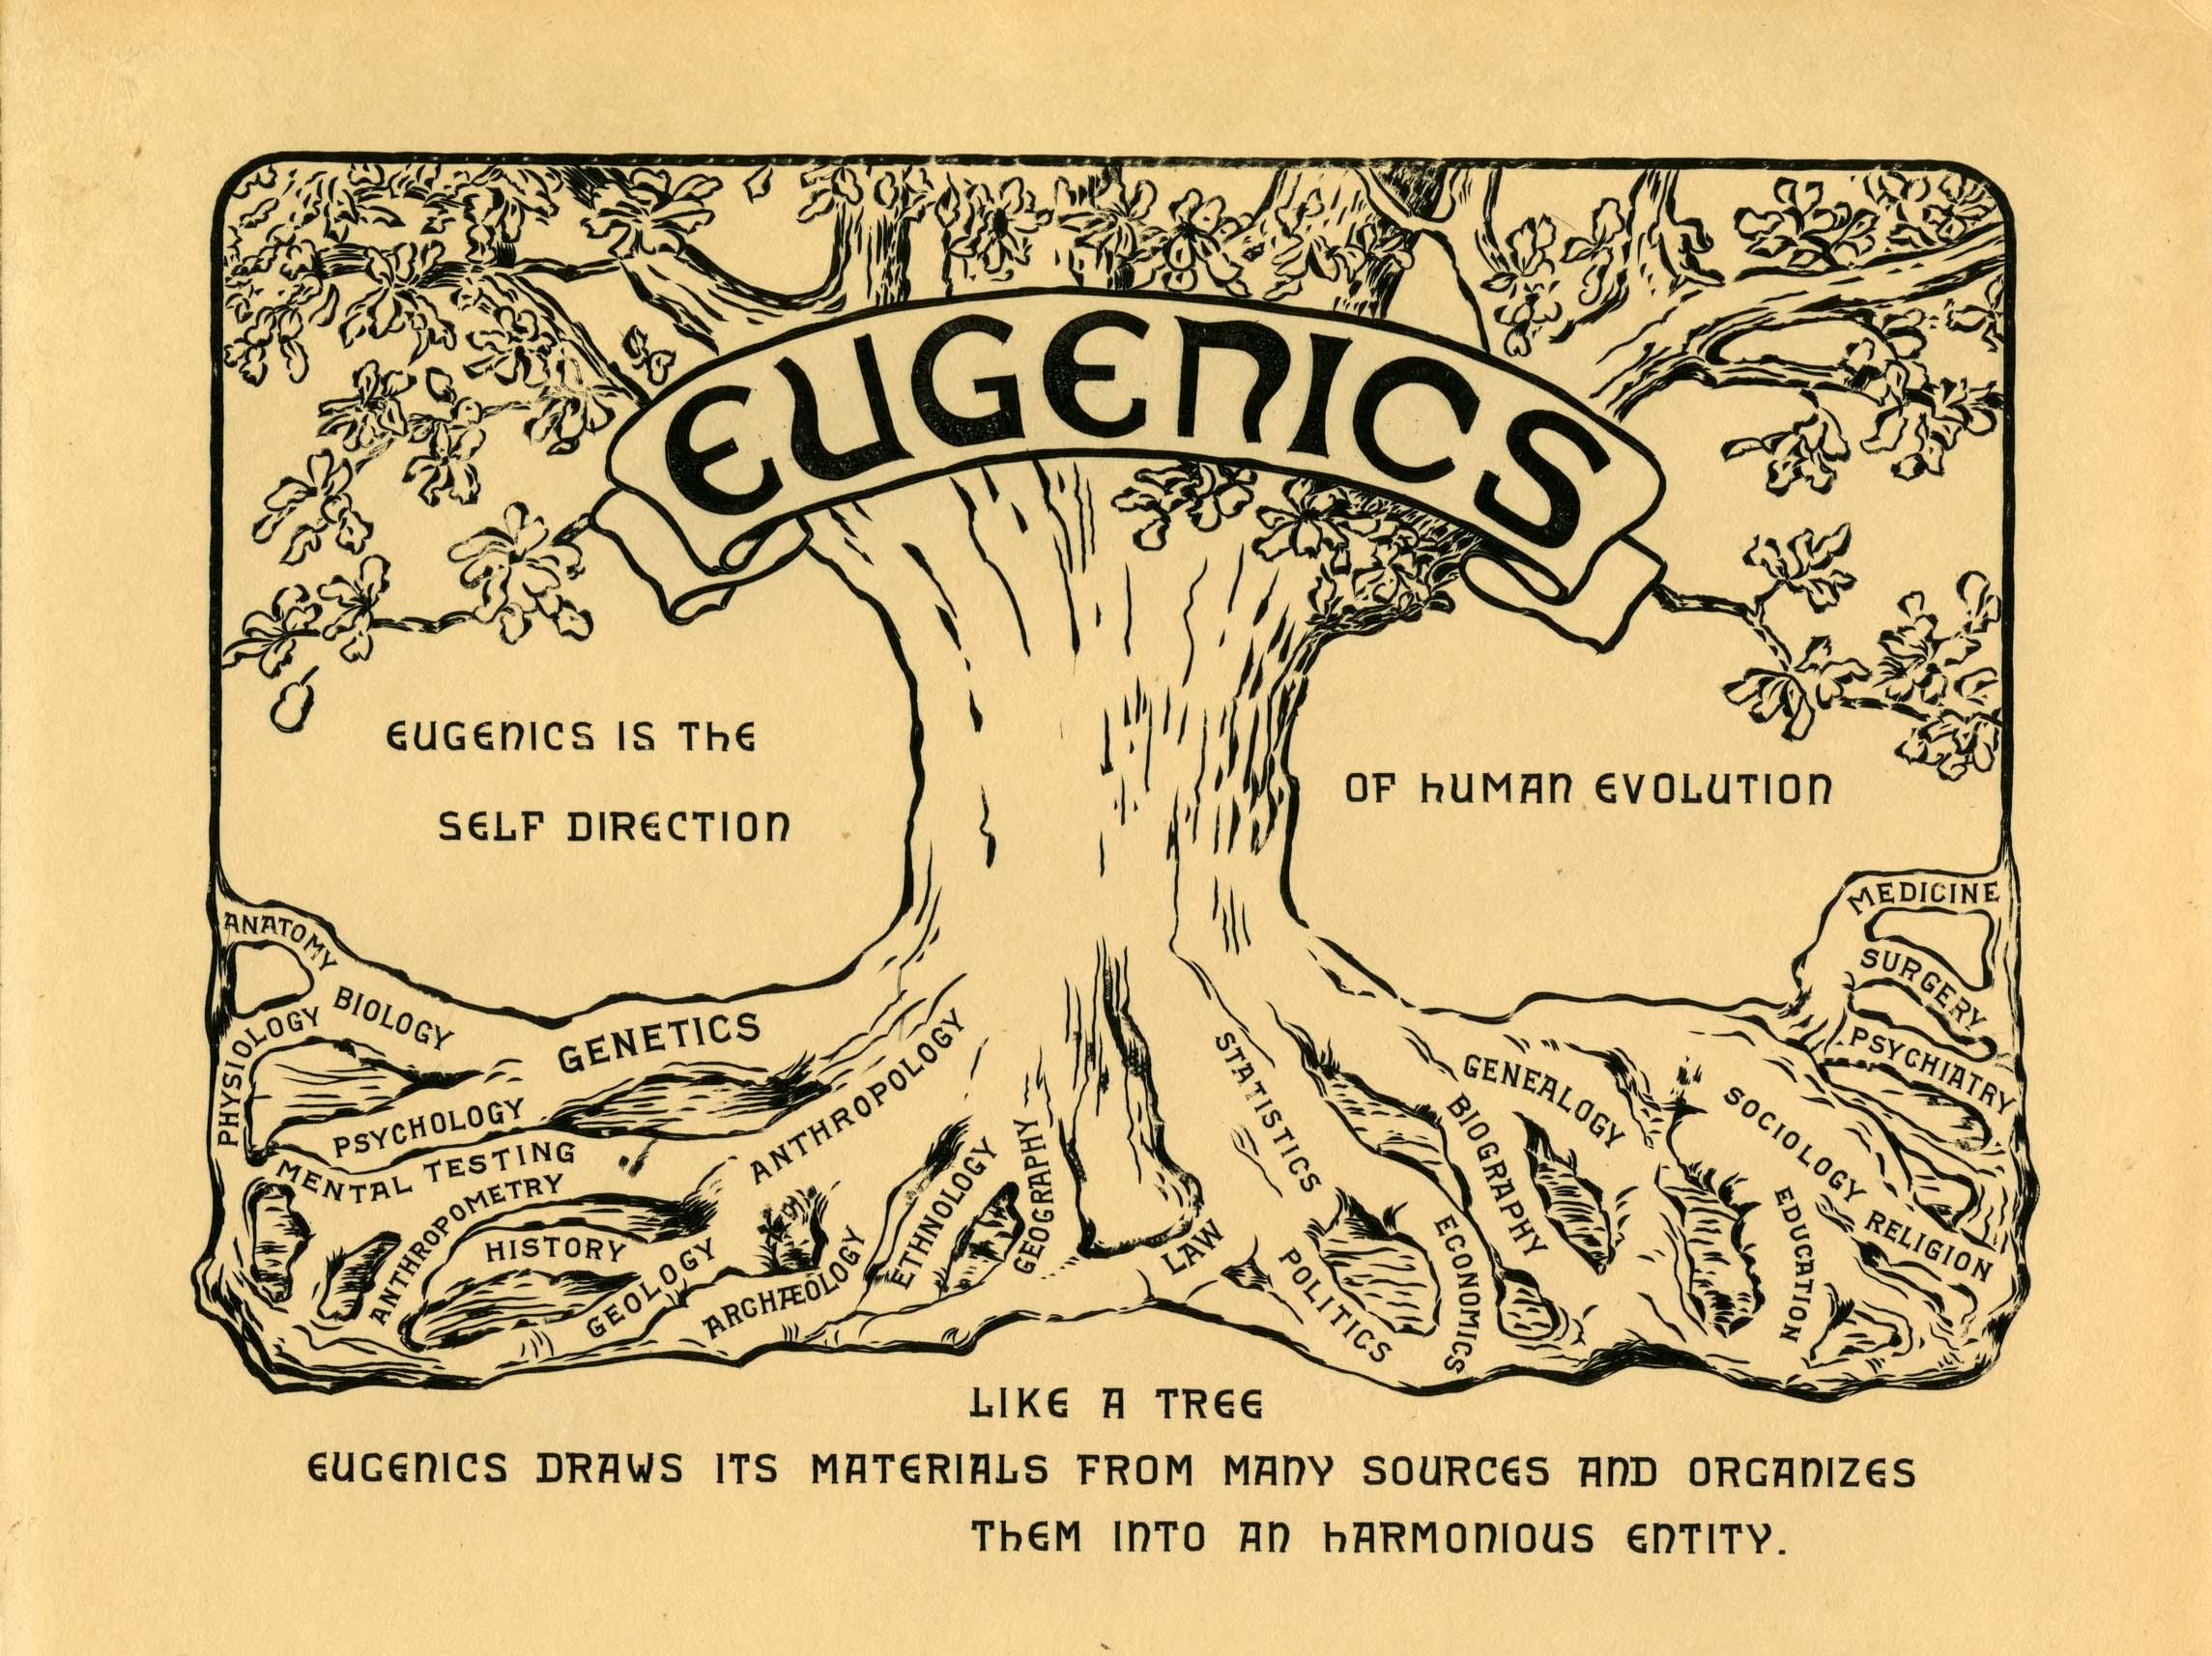 Certificate Of Appreciation From The Second International Congress Of Eugenics · Onview